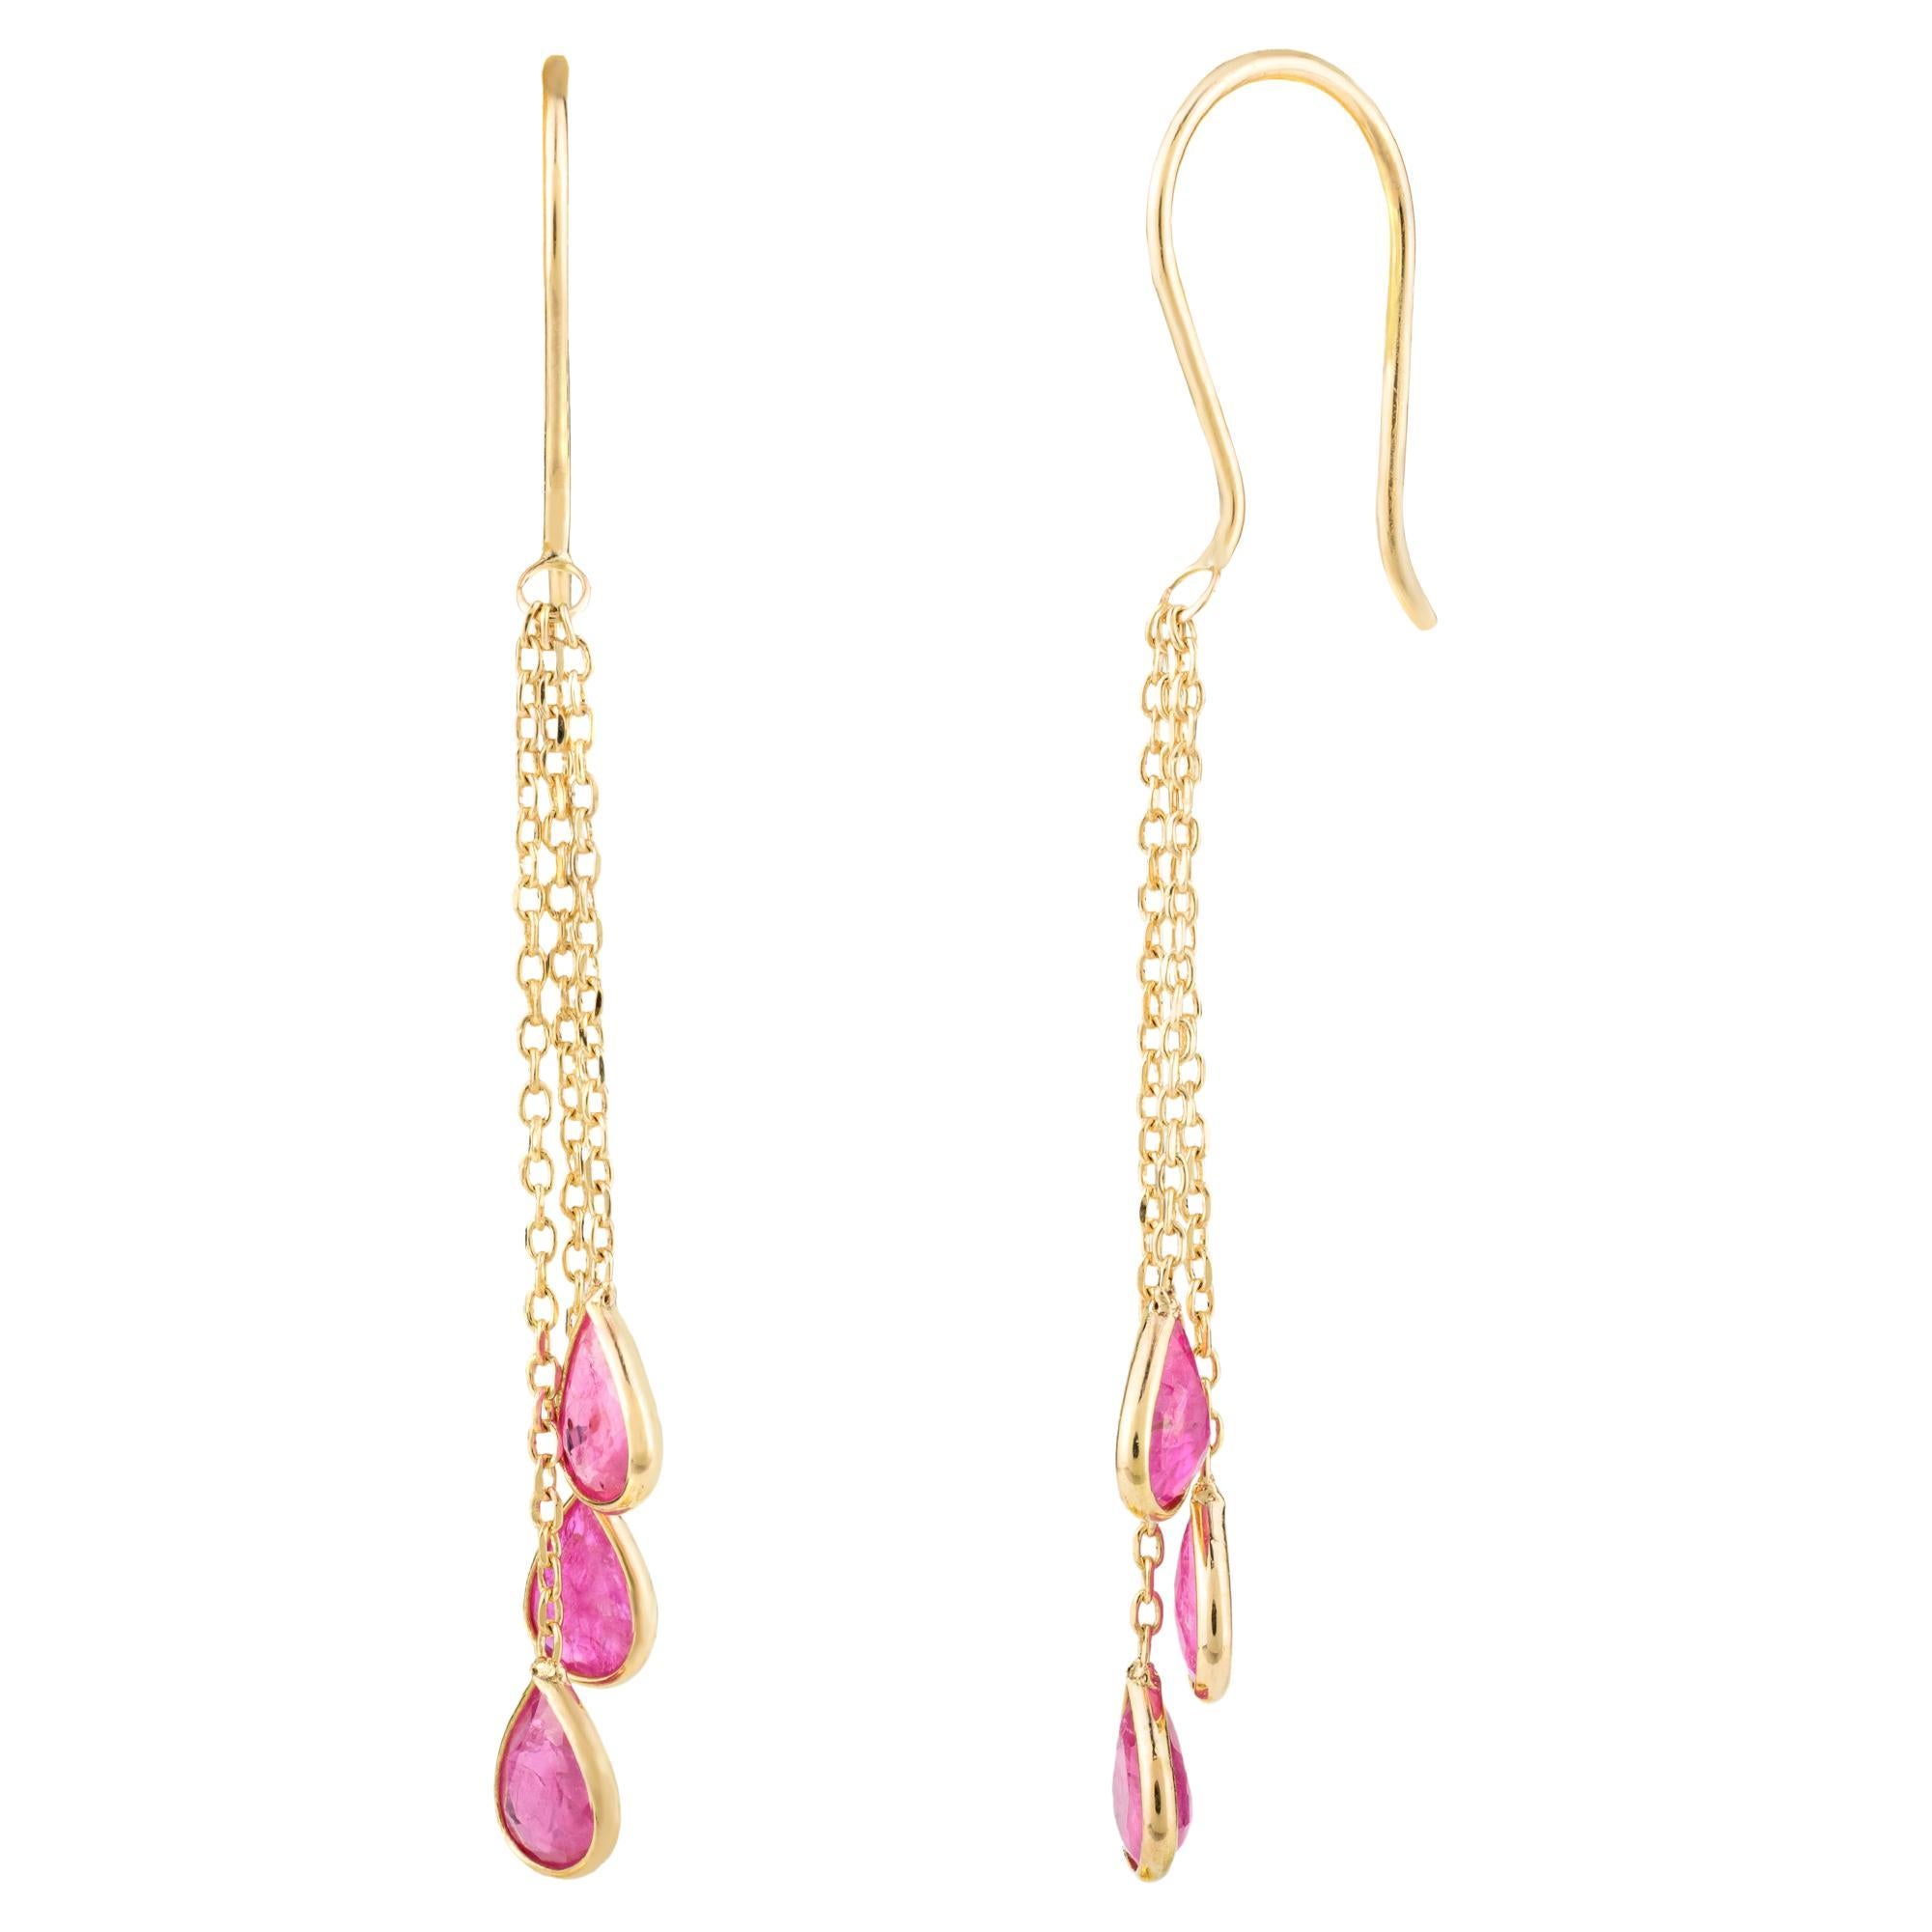 Minimal 18k Solid Yellow Gold Ruby Multi Chain Drop Earrings Gift for Her